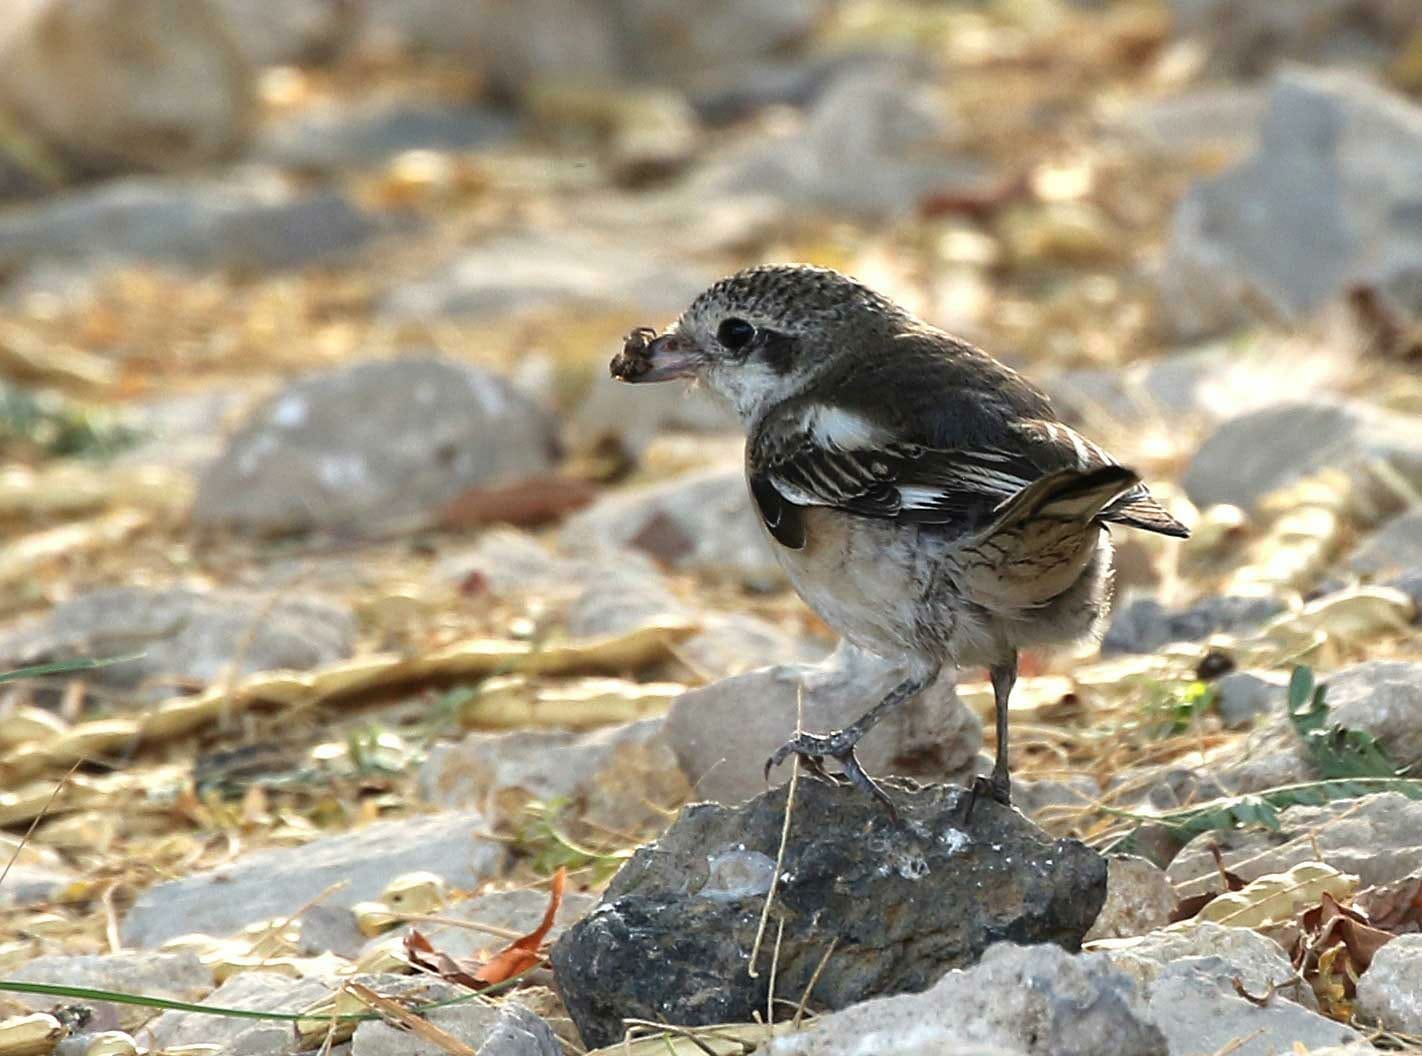 Masked Shrike with a spider in its beak